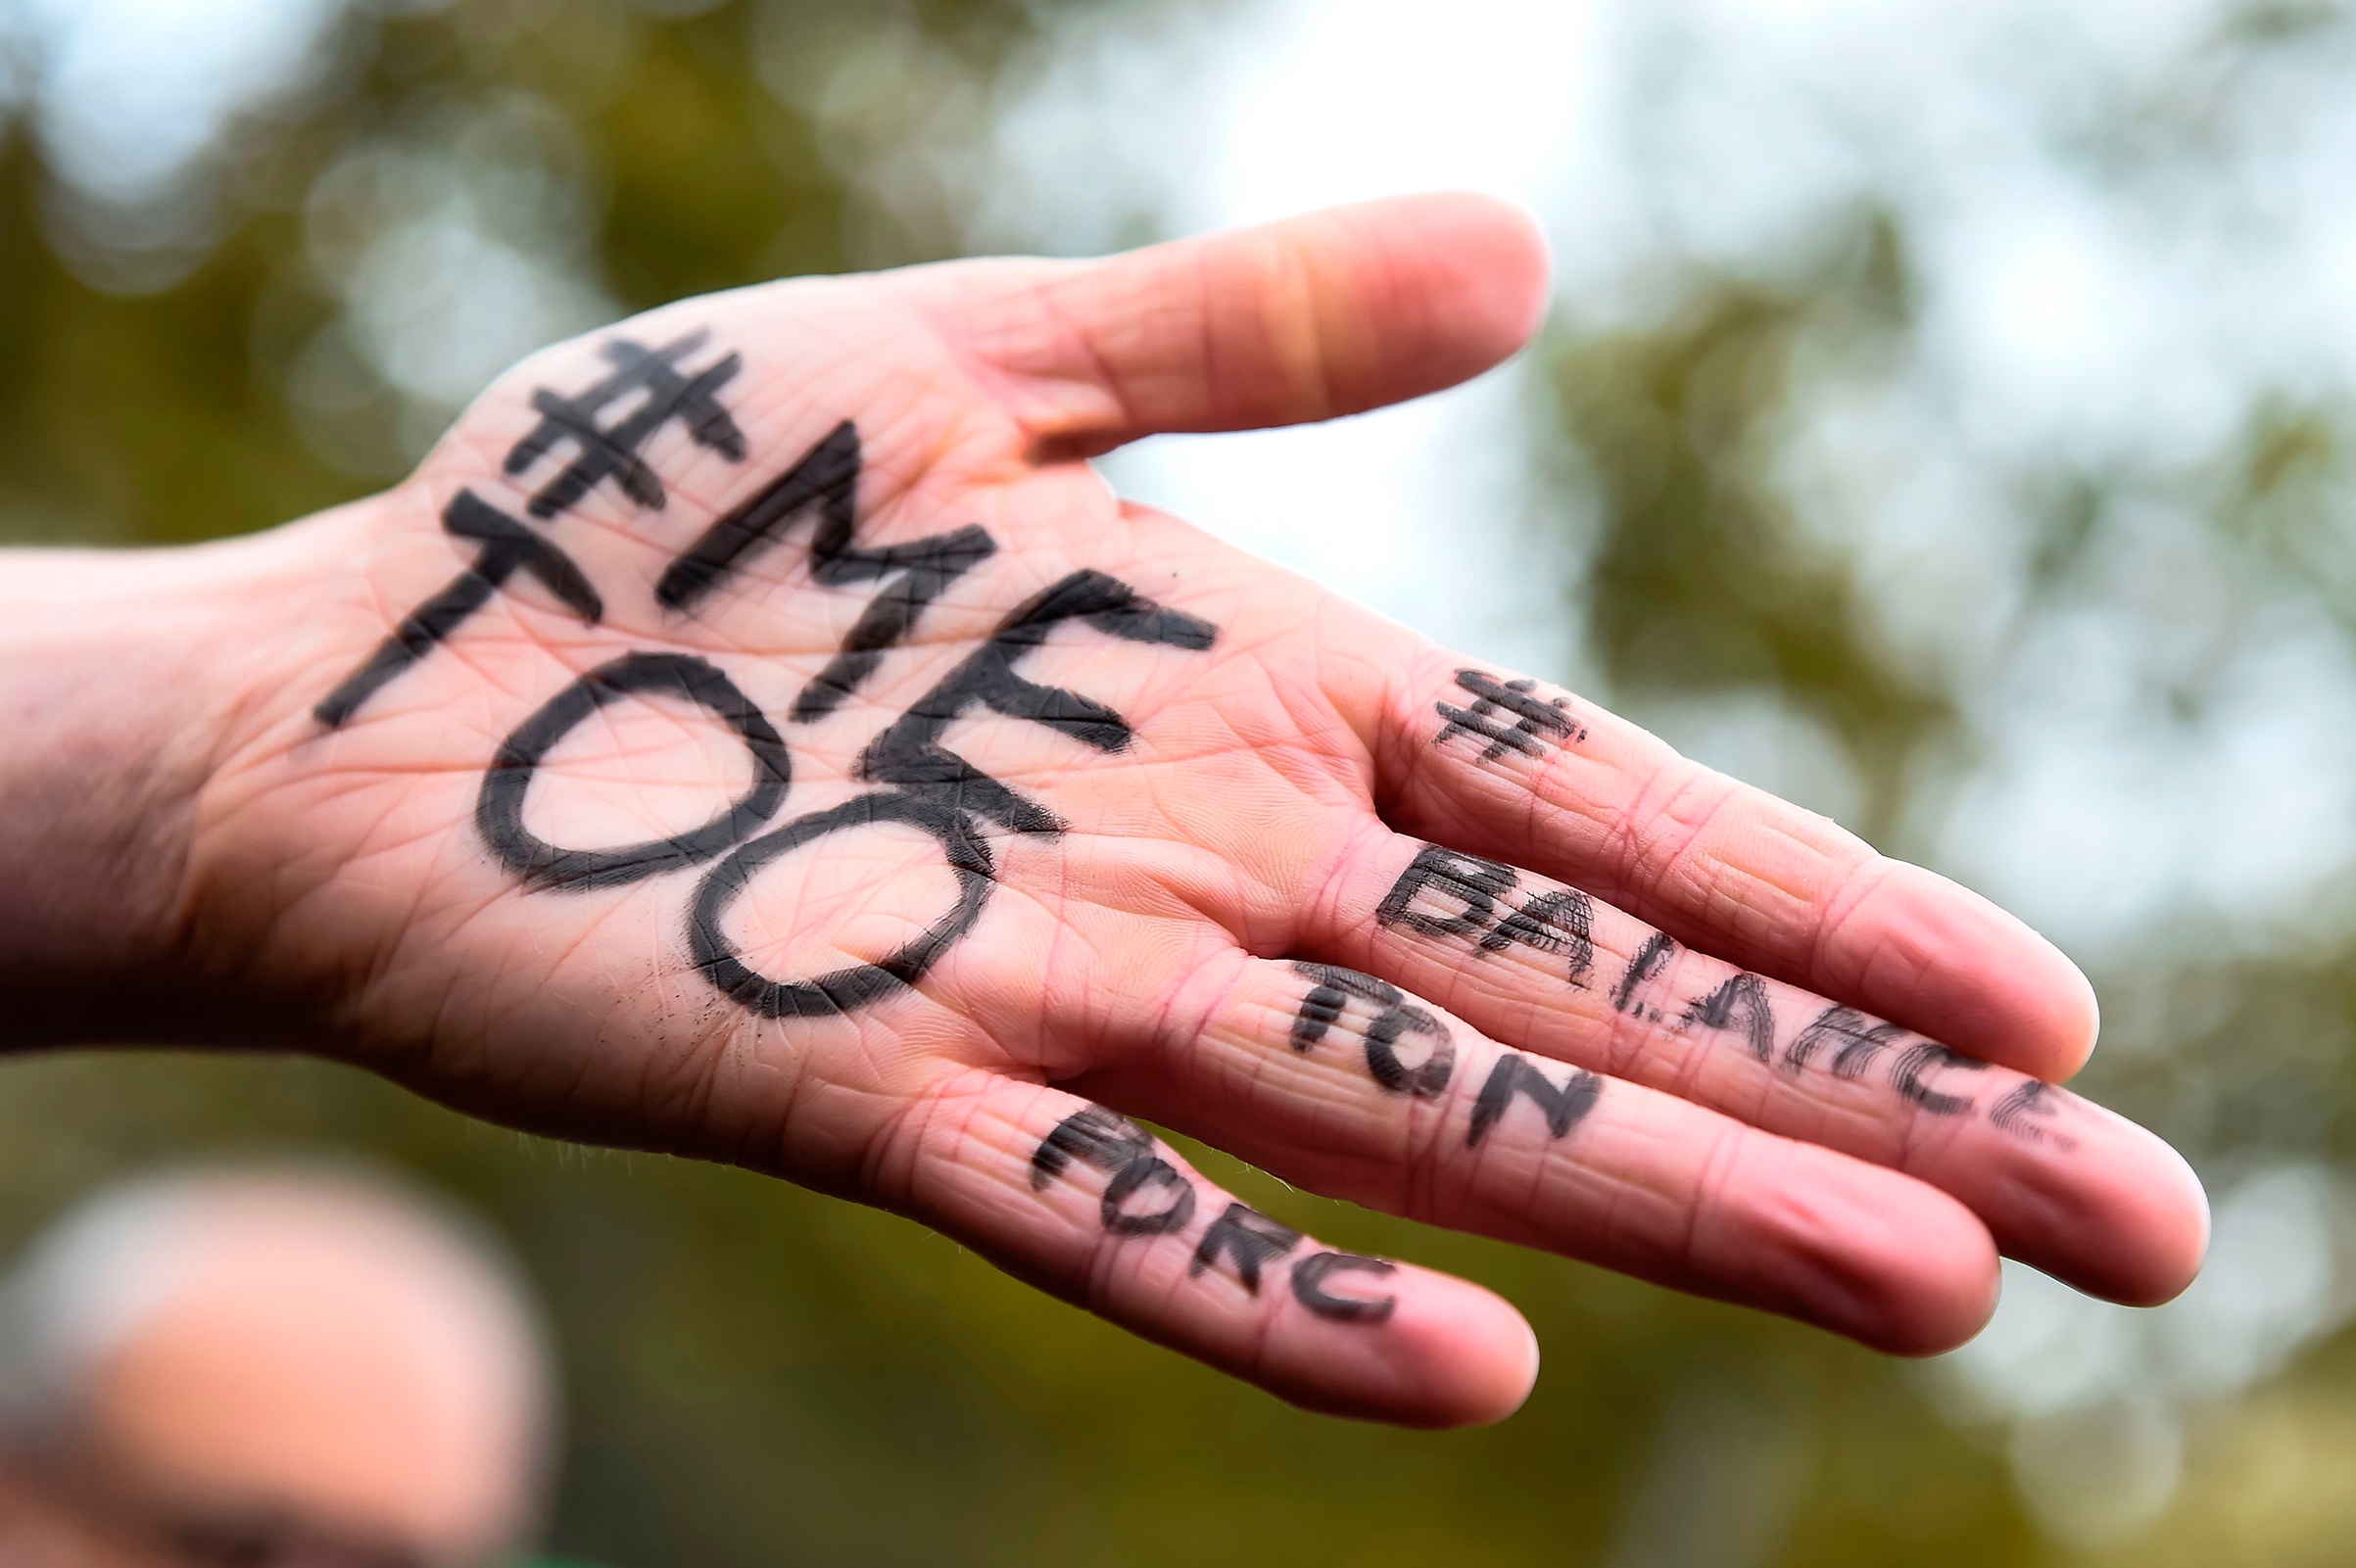 The messages "#Me too" and #Balancetonporc ("expose your pig") is written on the hand of a protester during a gathering against gender-based and sexual violence called by the Effronte-e-s Collective, on the Place de la Republique square in Paris on Oct. 29, 2017. (Bertrand Guay—AFP/Getty Images)